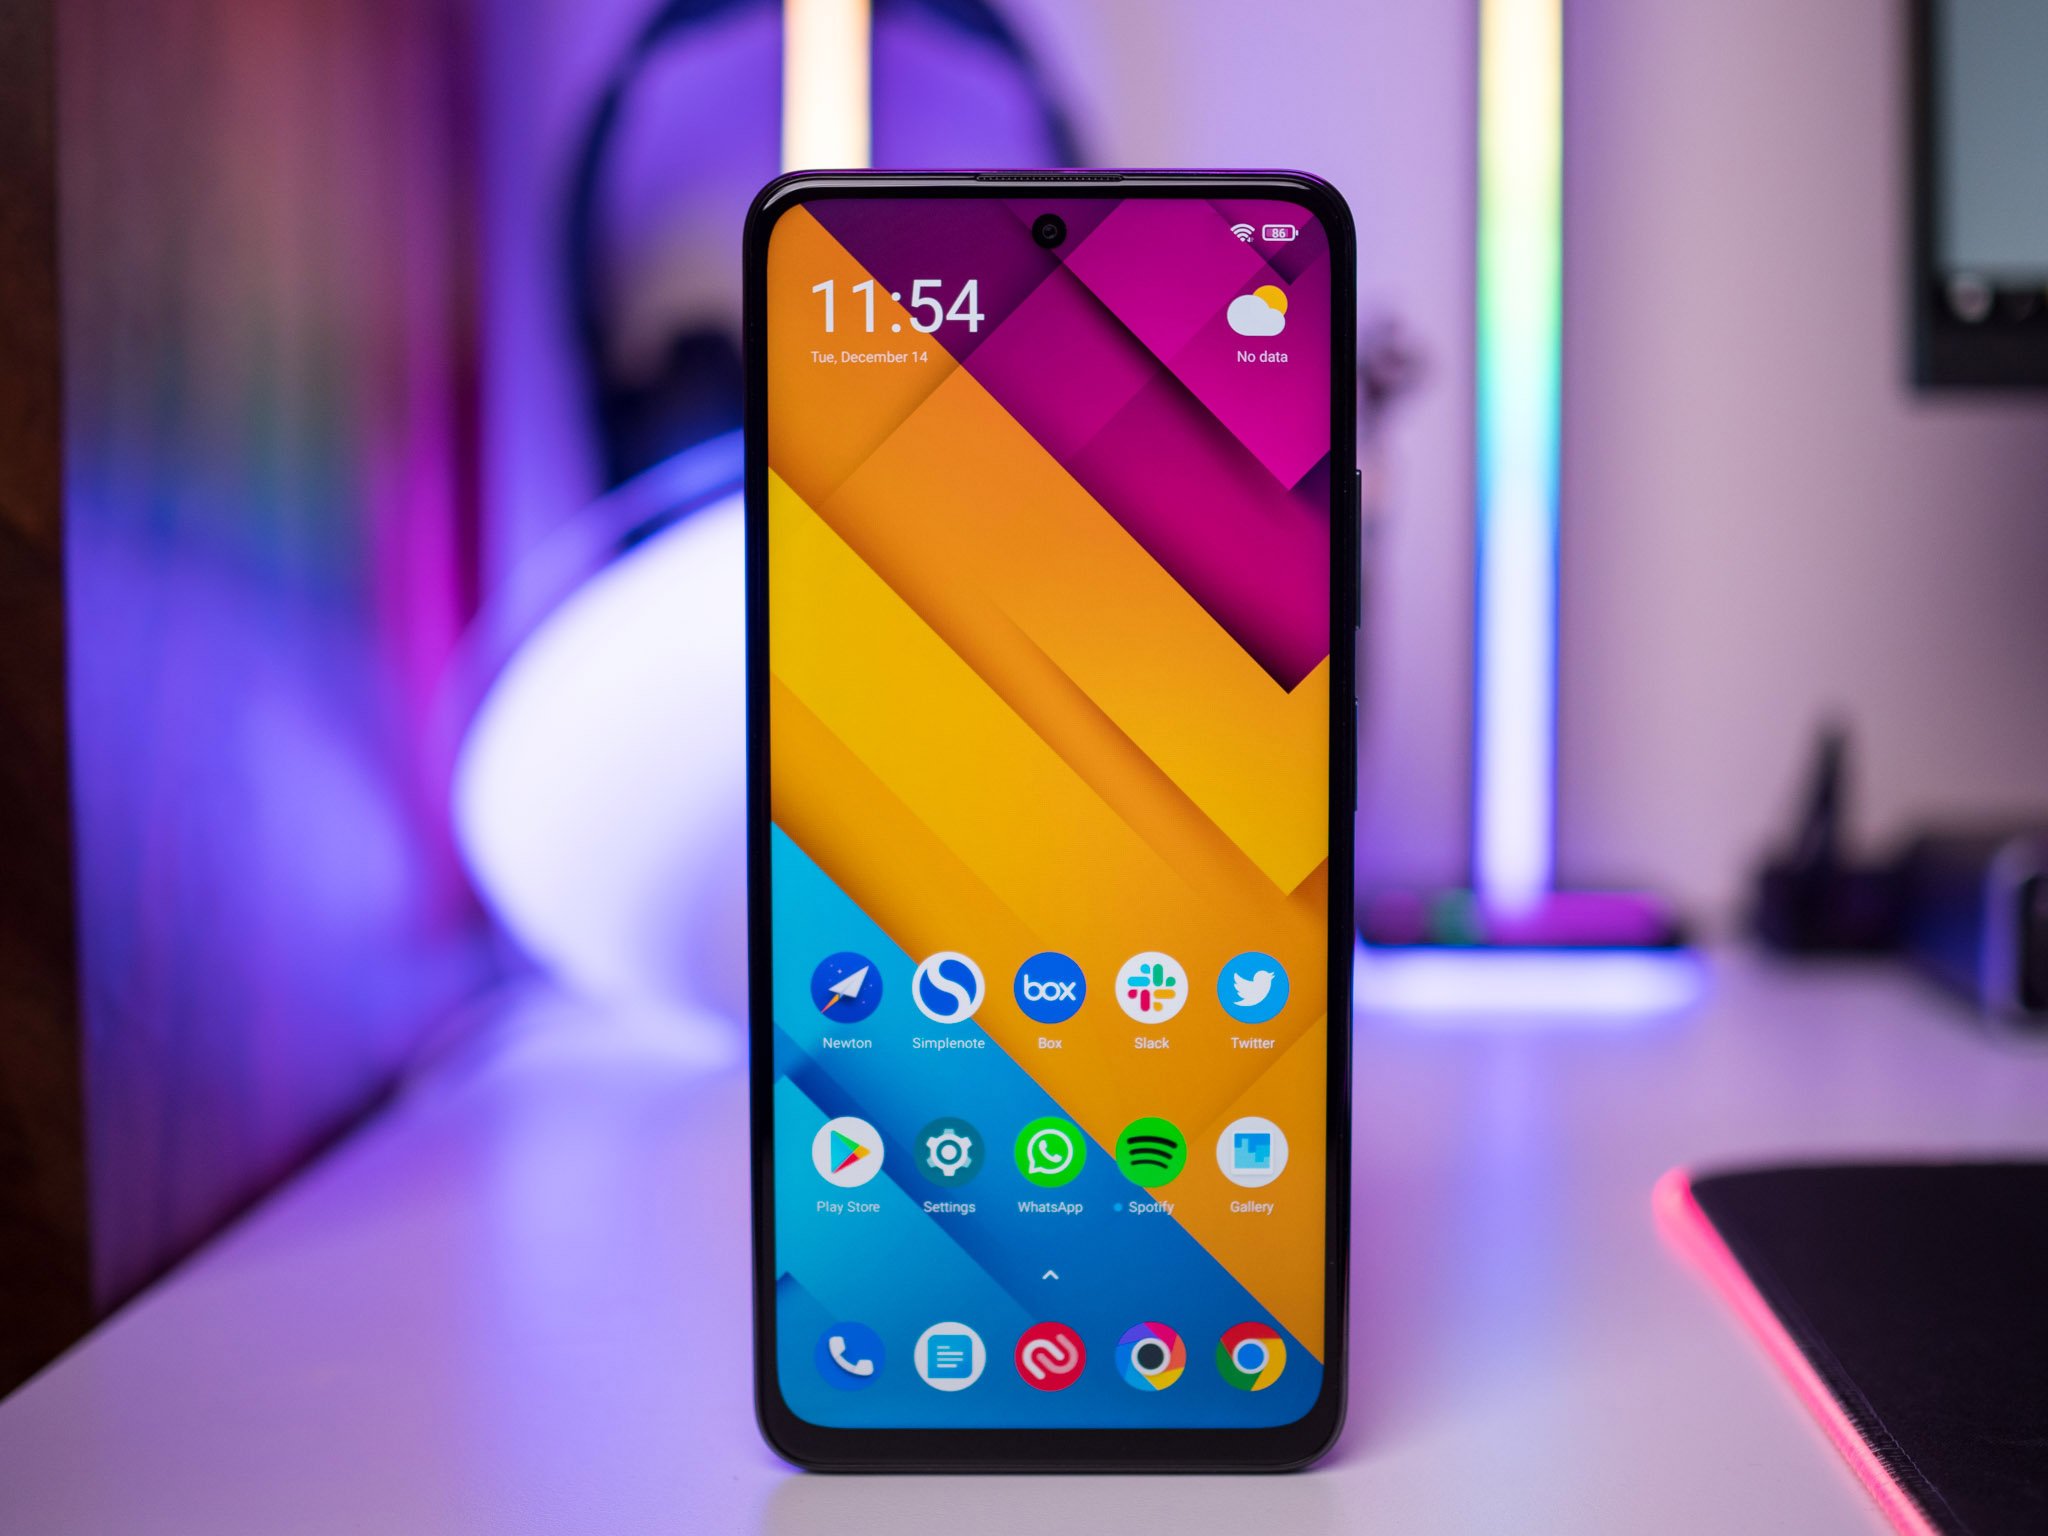 POCO X3 GT is a rebranded Redmi Note 10 Pro 5G with a minor design update